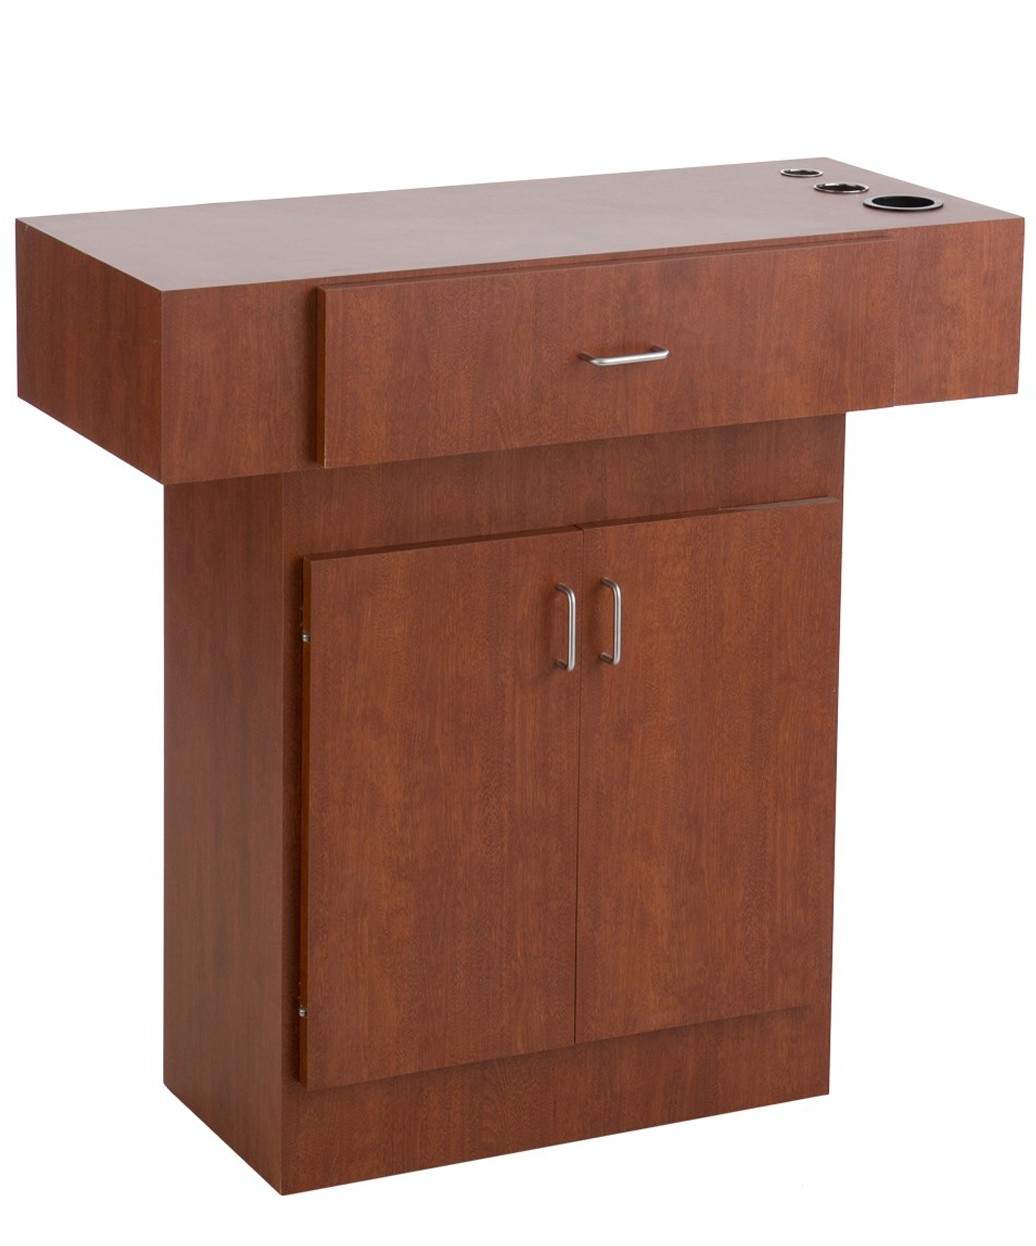 Econo wood salon station barber counter with storage cabinet